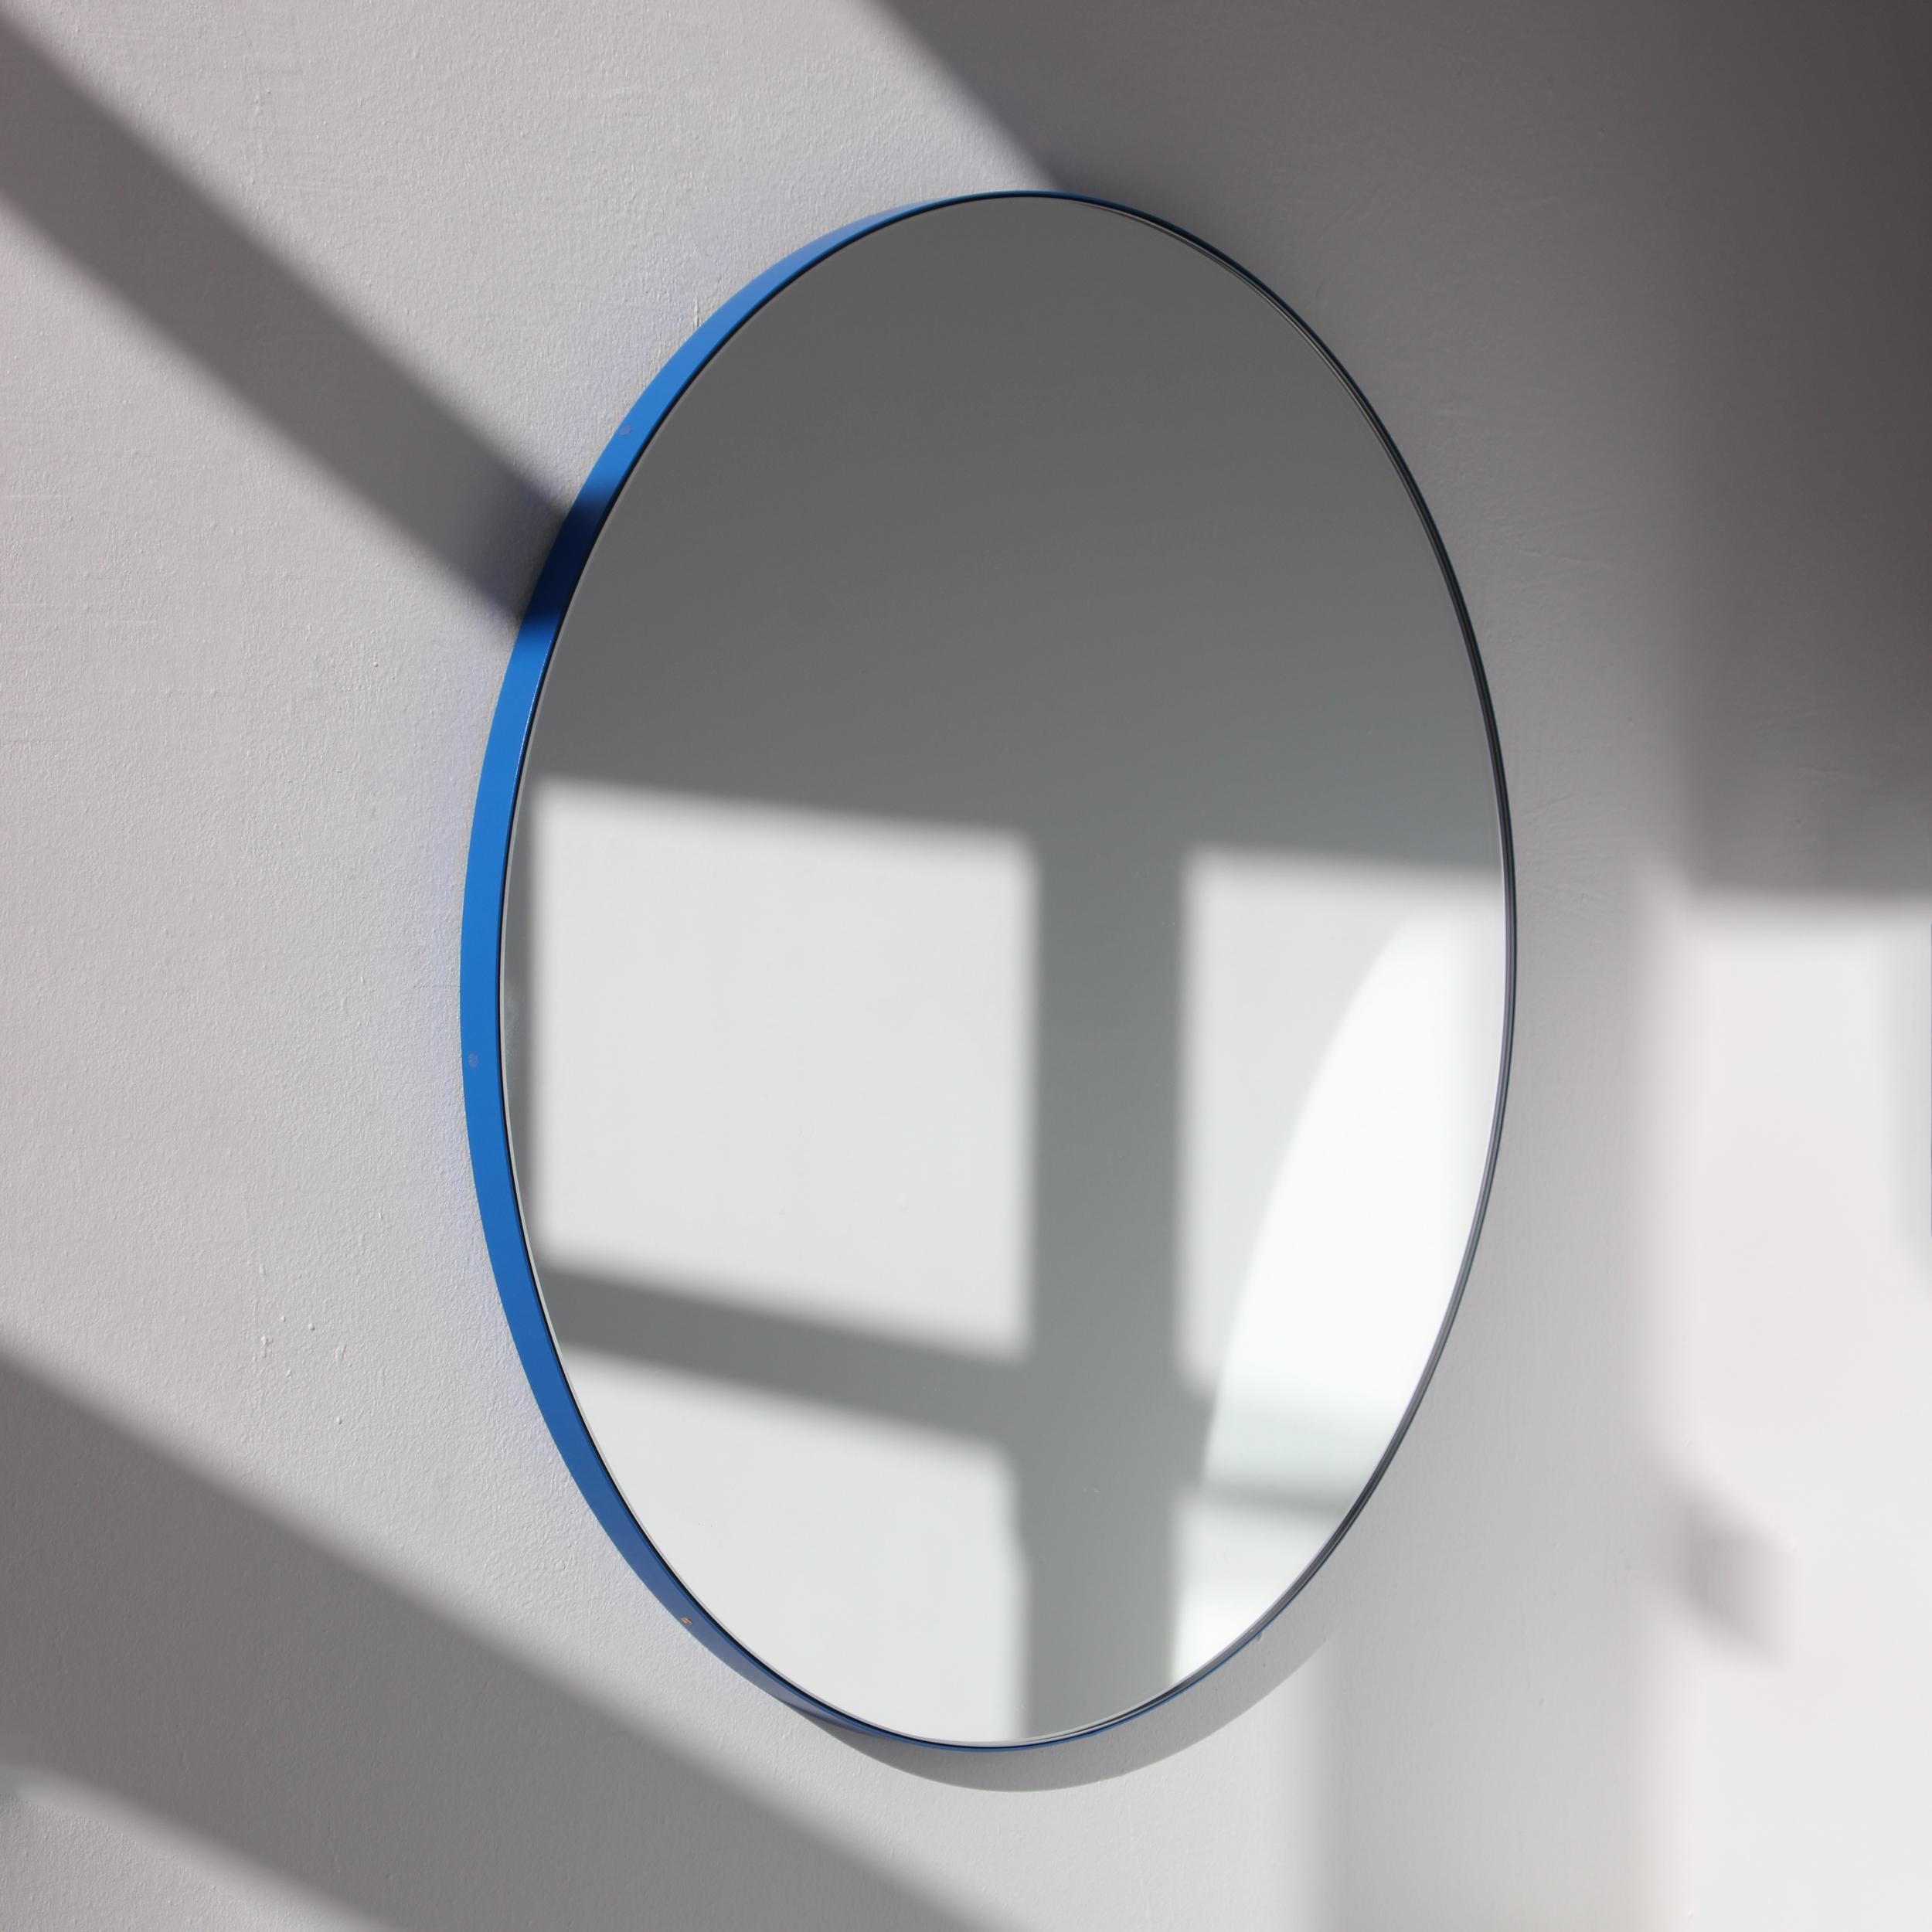 Minimalist round mirror with a modern aluminium powder coated blue frame. Designed and handcrafted in London, UK.

Our Orbis Dualis™ mirrors are designed with an integrated French cleat (split batten) system that ensures the mirror is securely